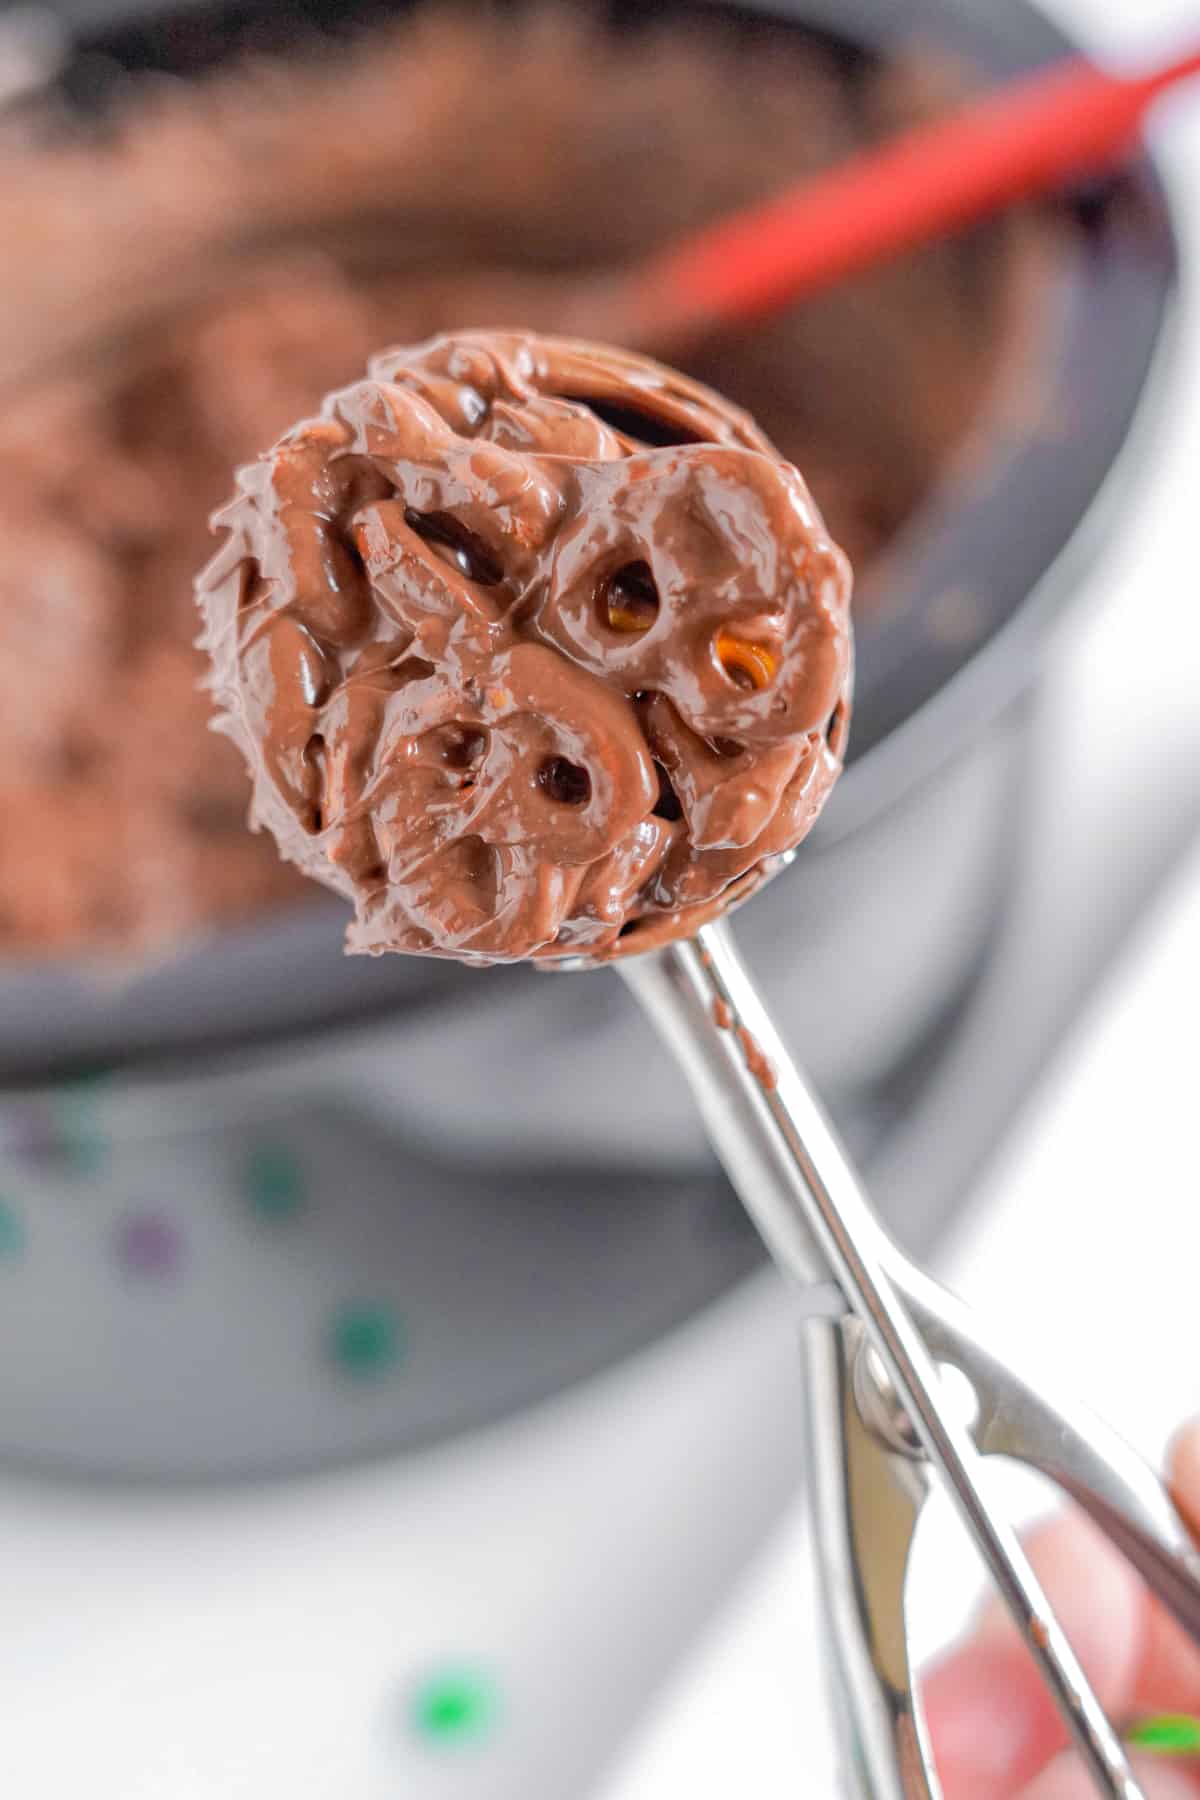 Scooping chocolate pretzel candy with a cookie scoop from a crockpot in the background.